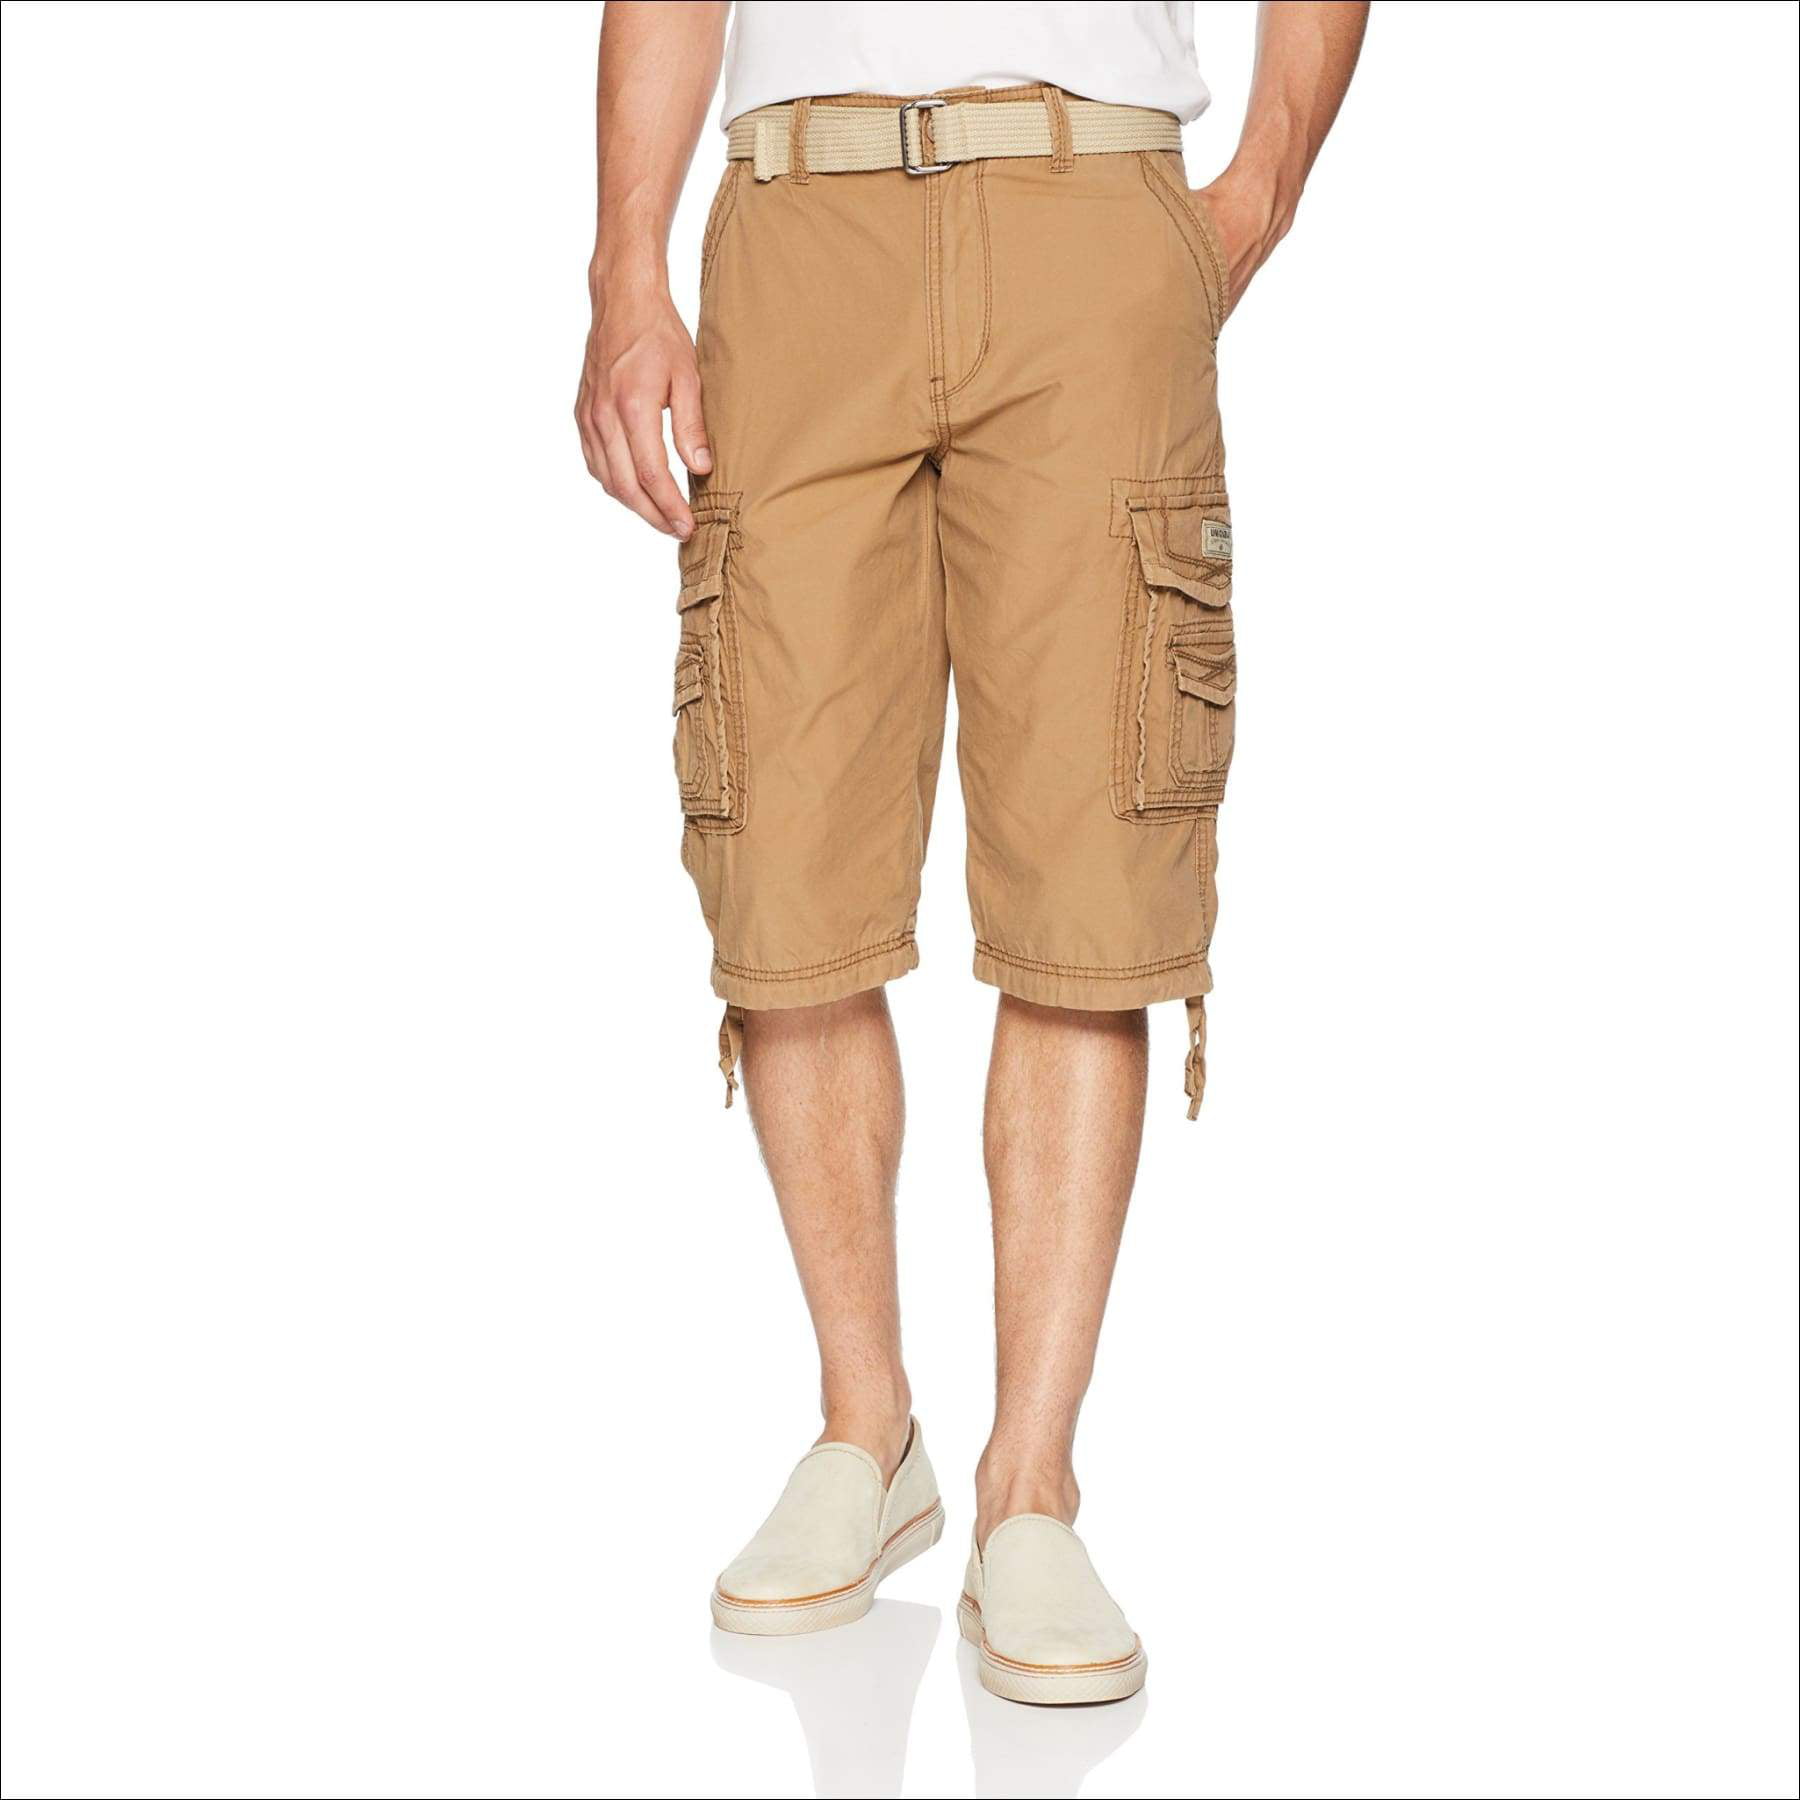 Unionbay Men's Cordova Belted Messenger Cargo Short - Reg and Big and ...